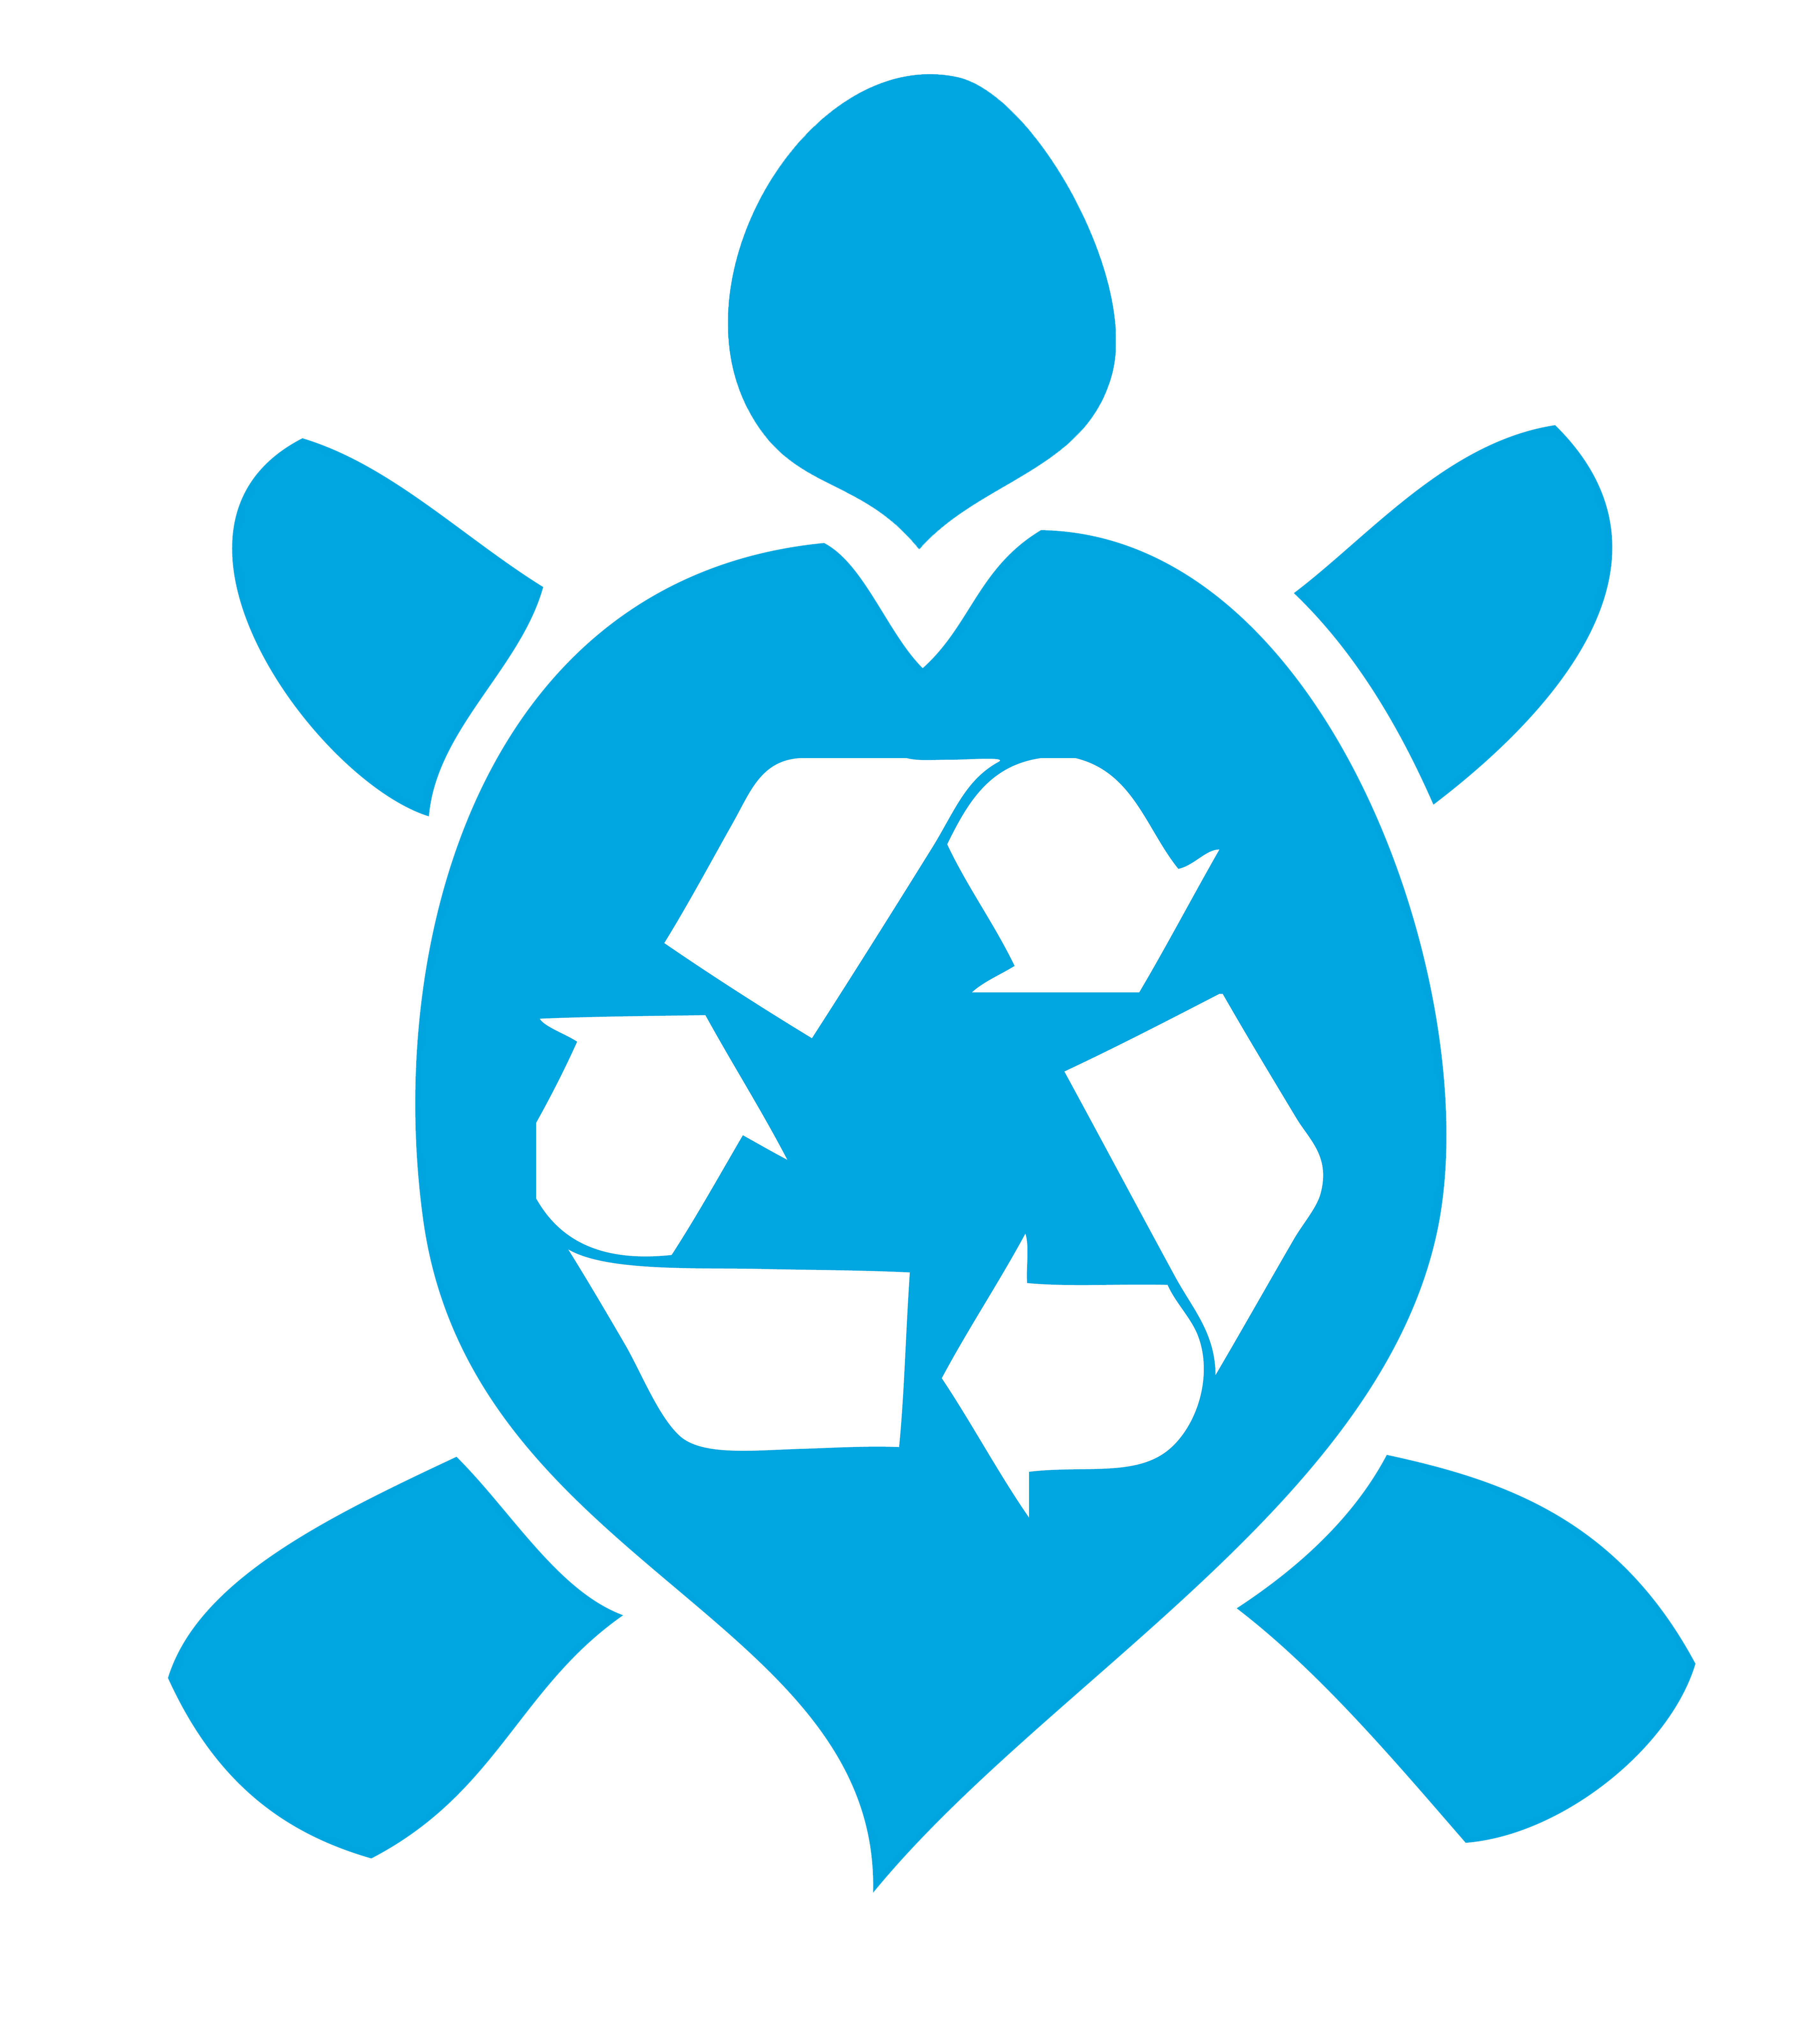 Green Terp waste icon